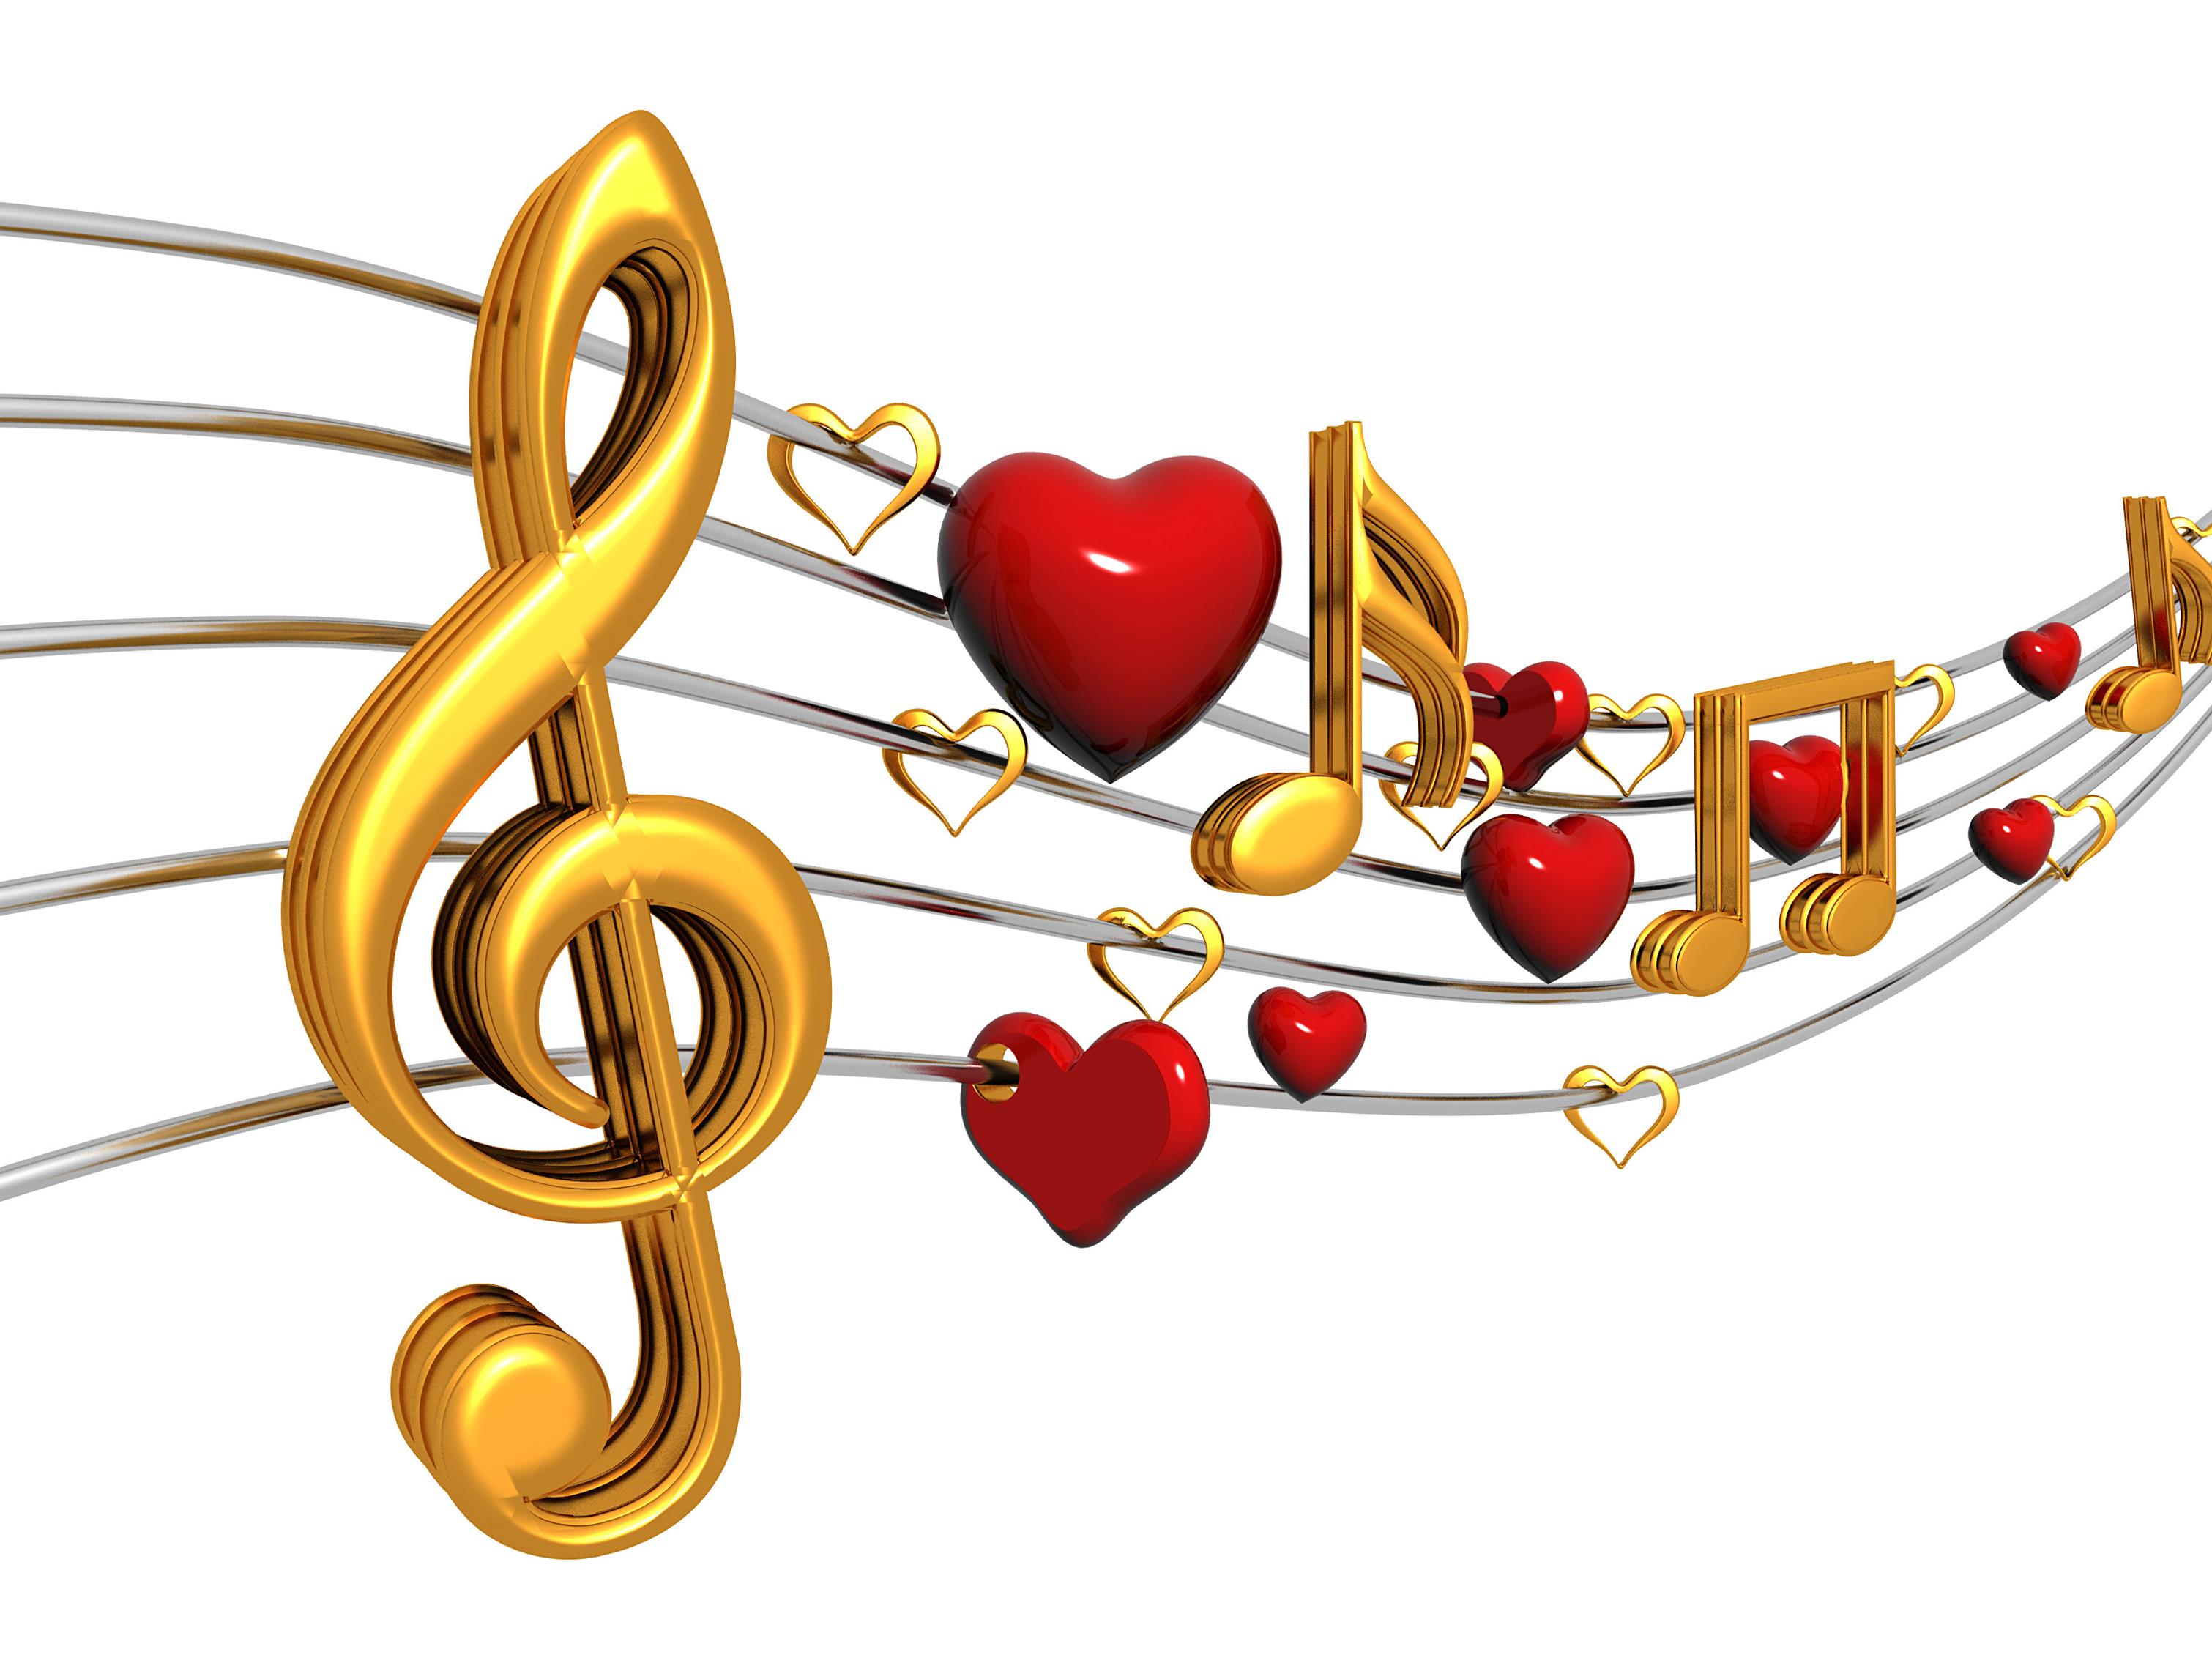 Music Notes Heart Beat   Clipart Panda   Free Clipart Images